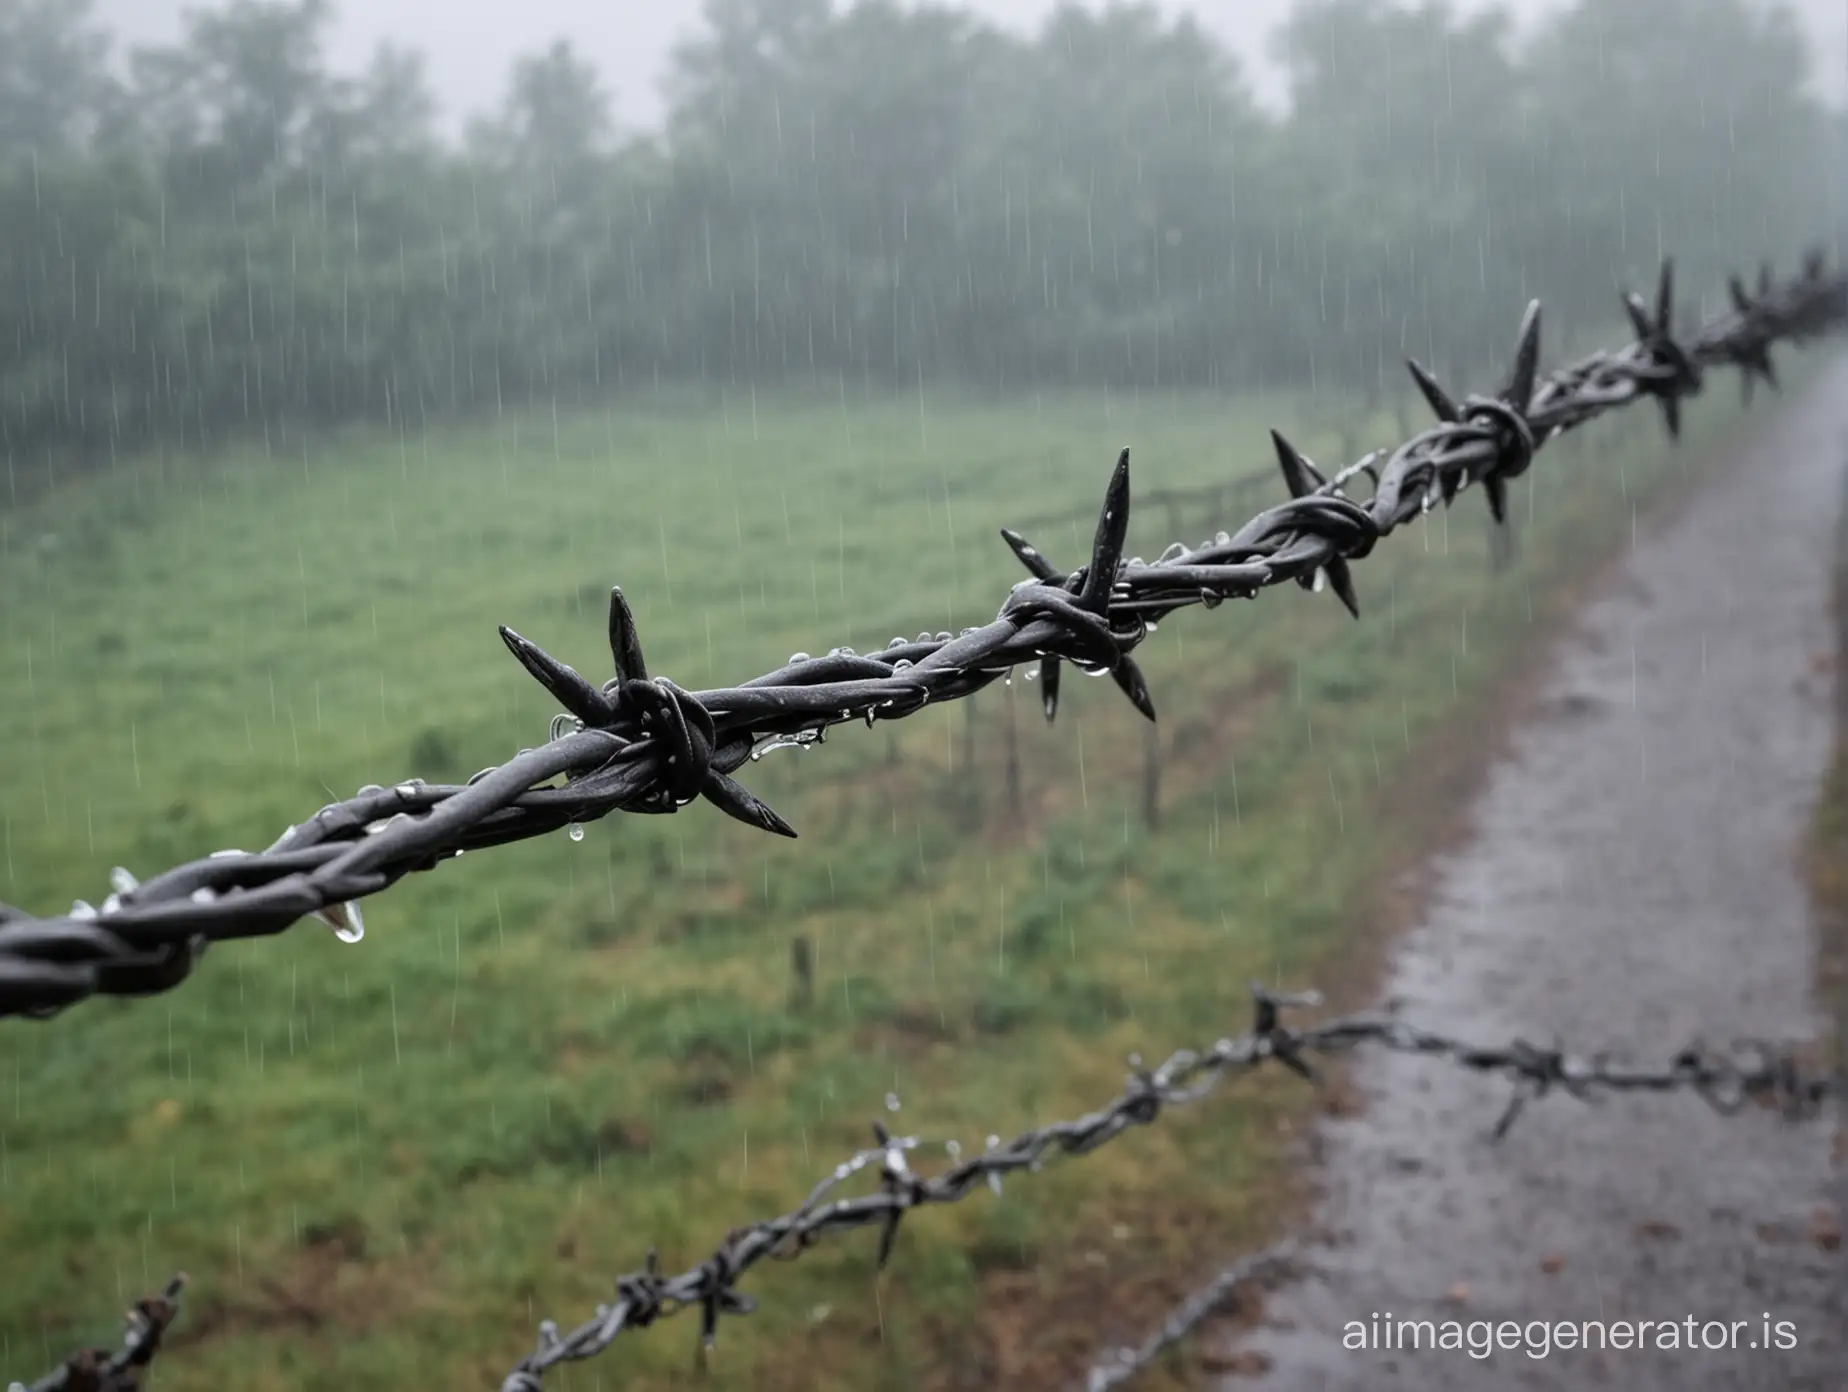 Gloomy-Rainy-Day-Barbed-Wire-Under-Pouring-Rain